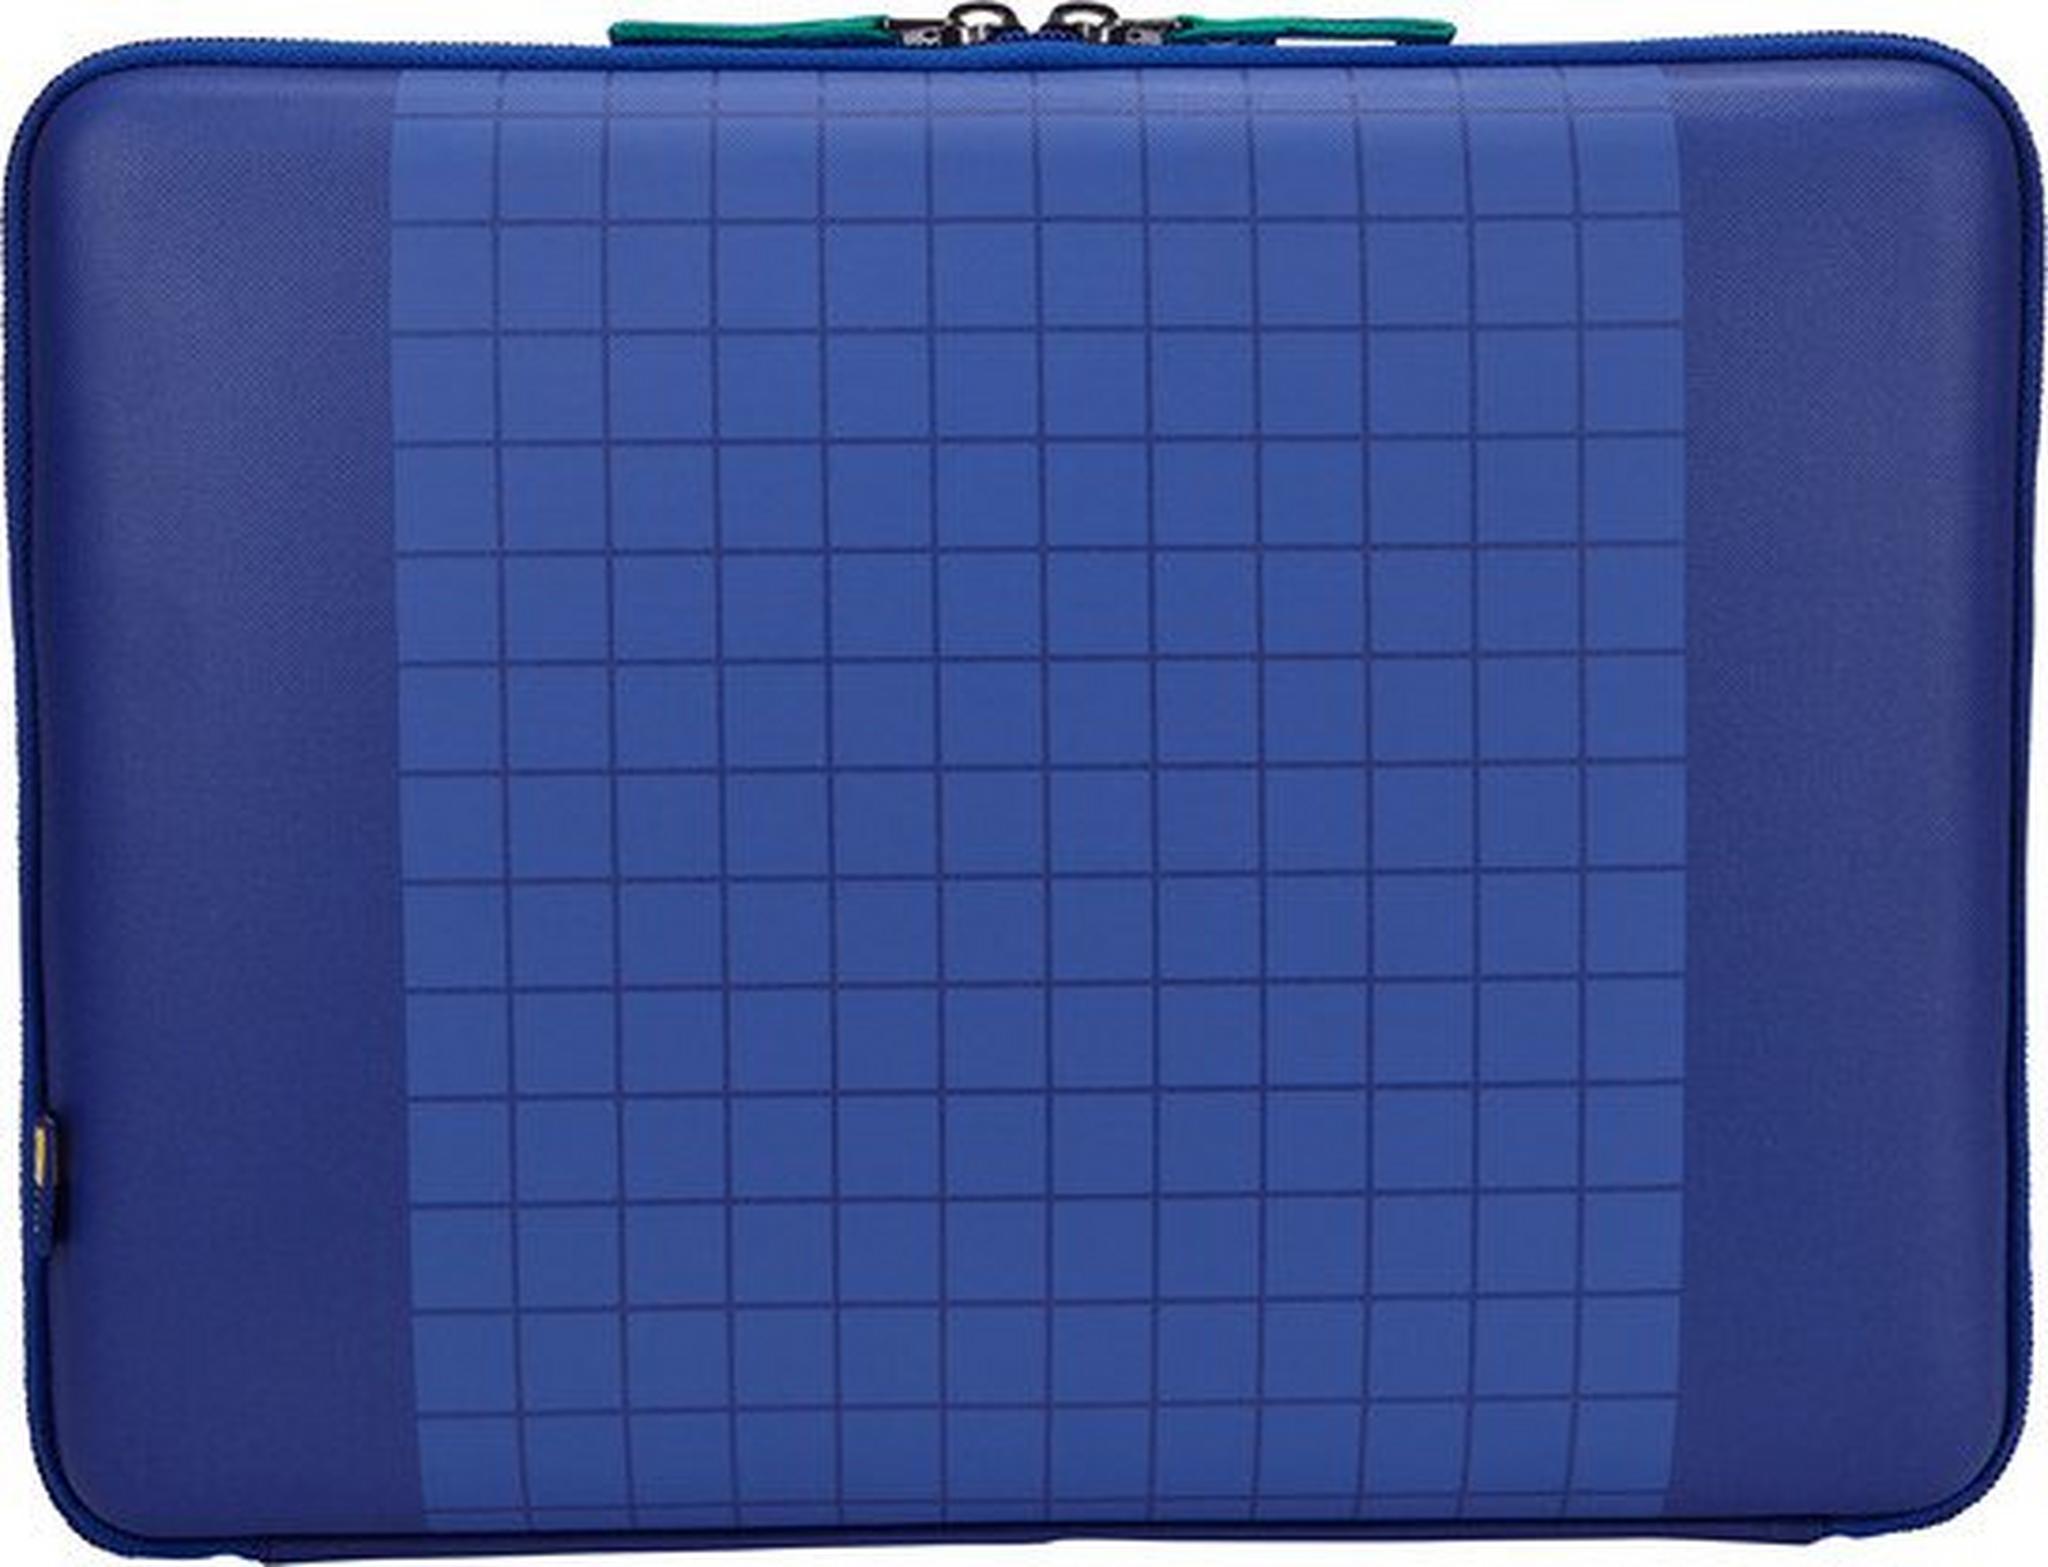 Case Logic Arca Protective Carrying Case for 11.6-inch Laptop (ARC-111) – Blue